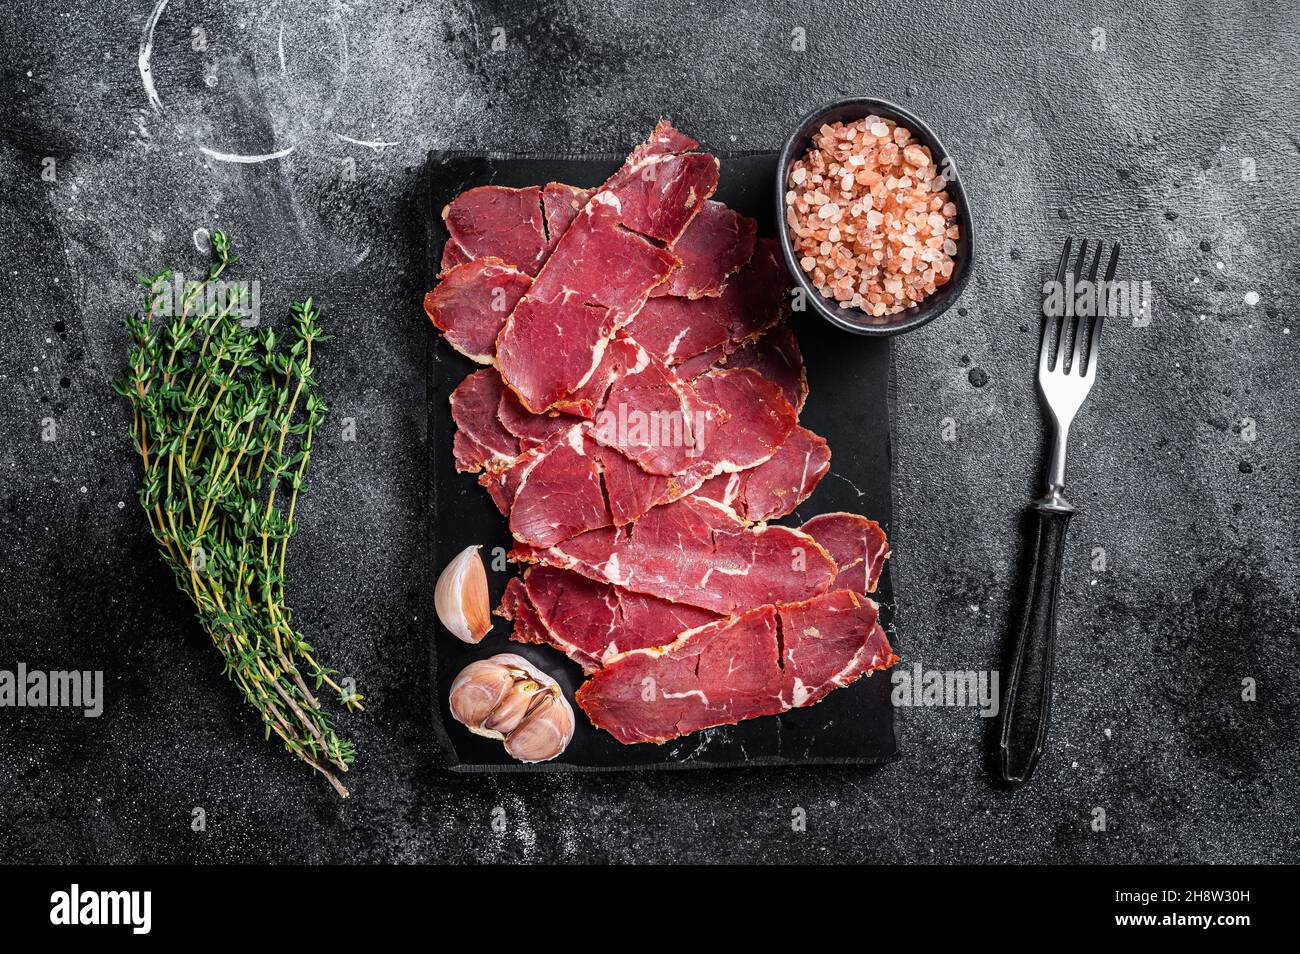 Sliced Pastrami roasted beef meat with herbs. Black background. Top view Stock Photo